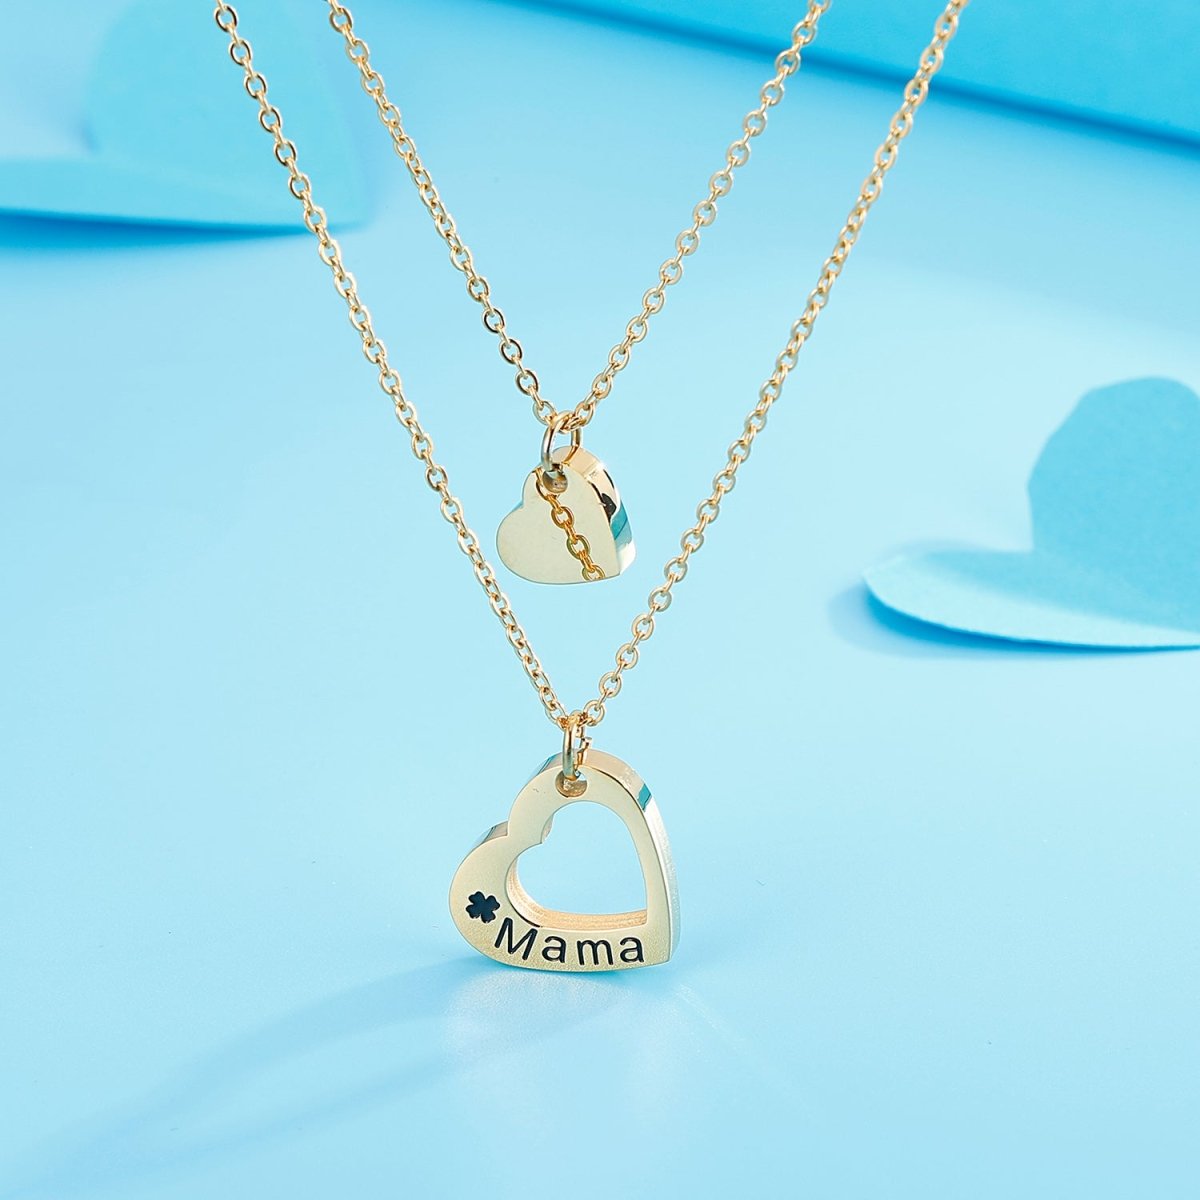 Necklace: "Mama" Cutout Heart Double-Layered - #variant_color# - #variant_size# - #variant_option#